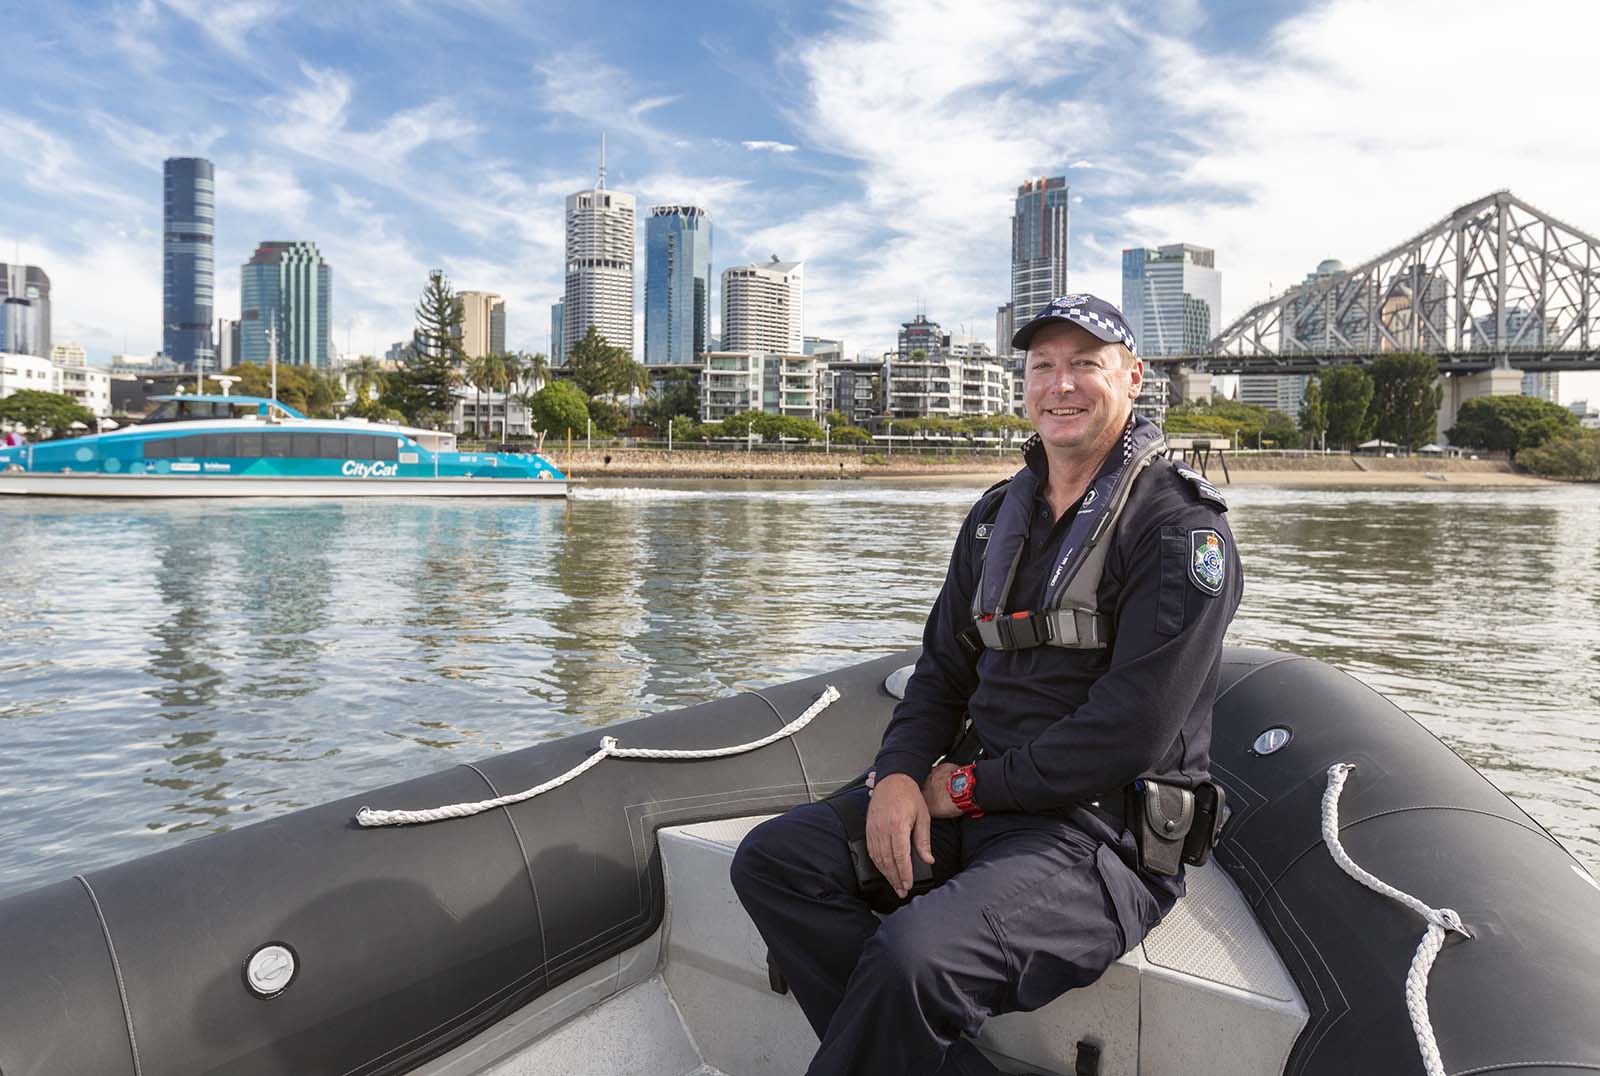 Sergeant Damian Hayes, water police officer | The heart of Brisbane River